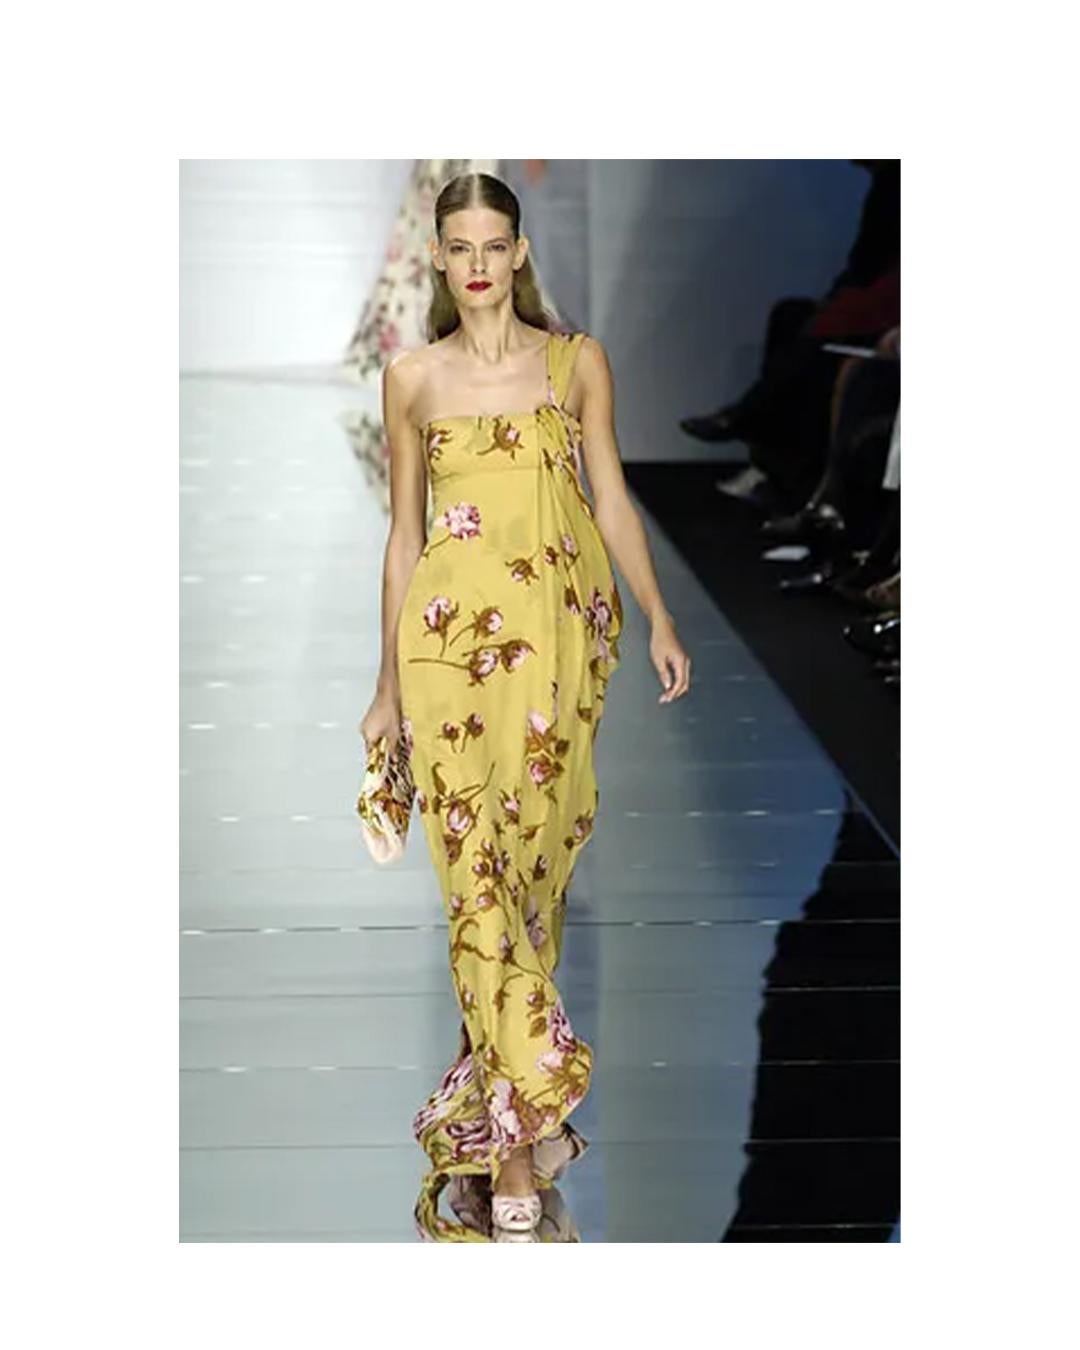 LOVE LALI VINTAGE

Such a dreamy and romantic gown from Valentino S/S 2006, featuring as look 63 on the runway in yellow
Composed of silk chiffon layers that cut on the bias
The underlying layer is the mustard yellow colour that you see on the